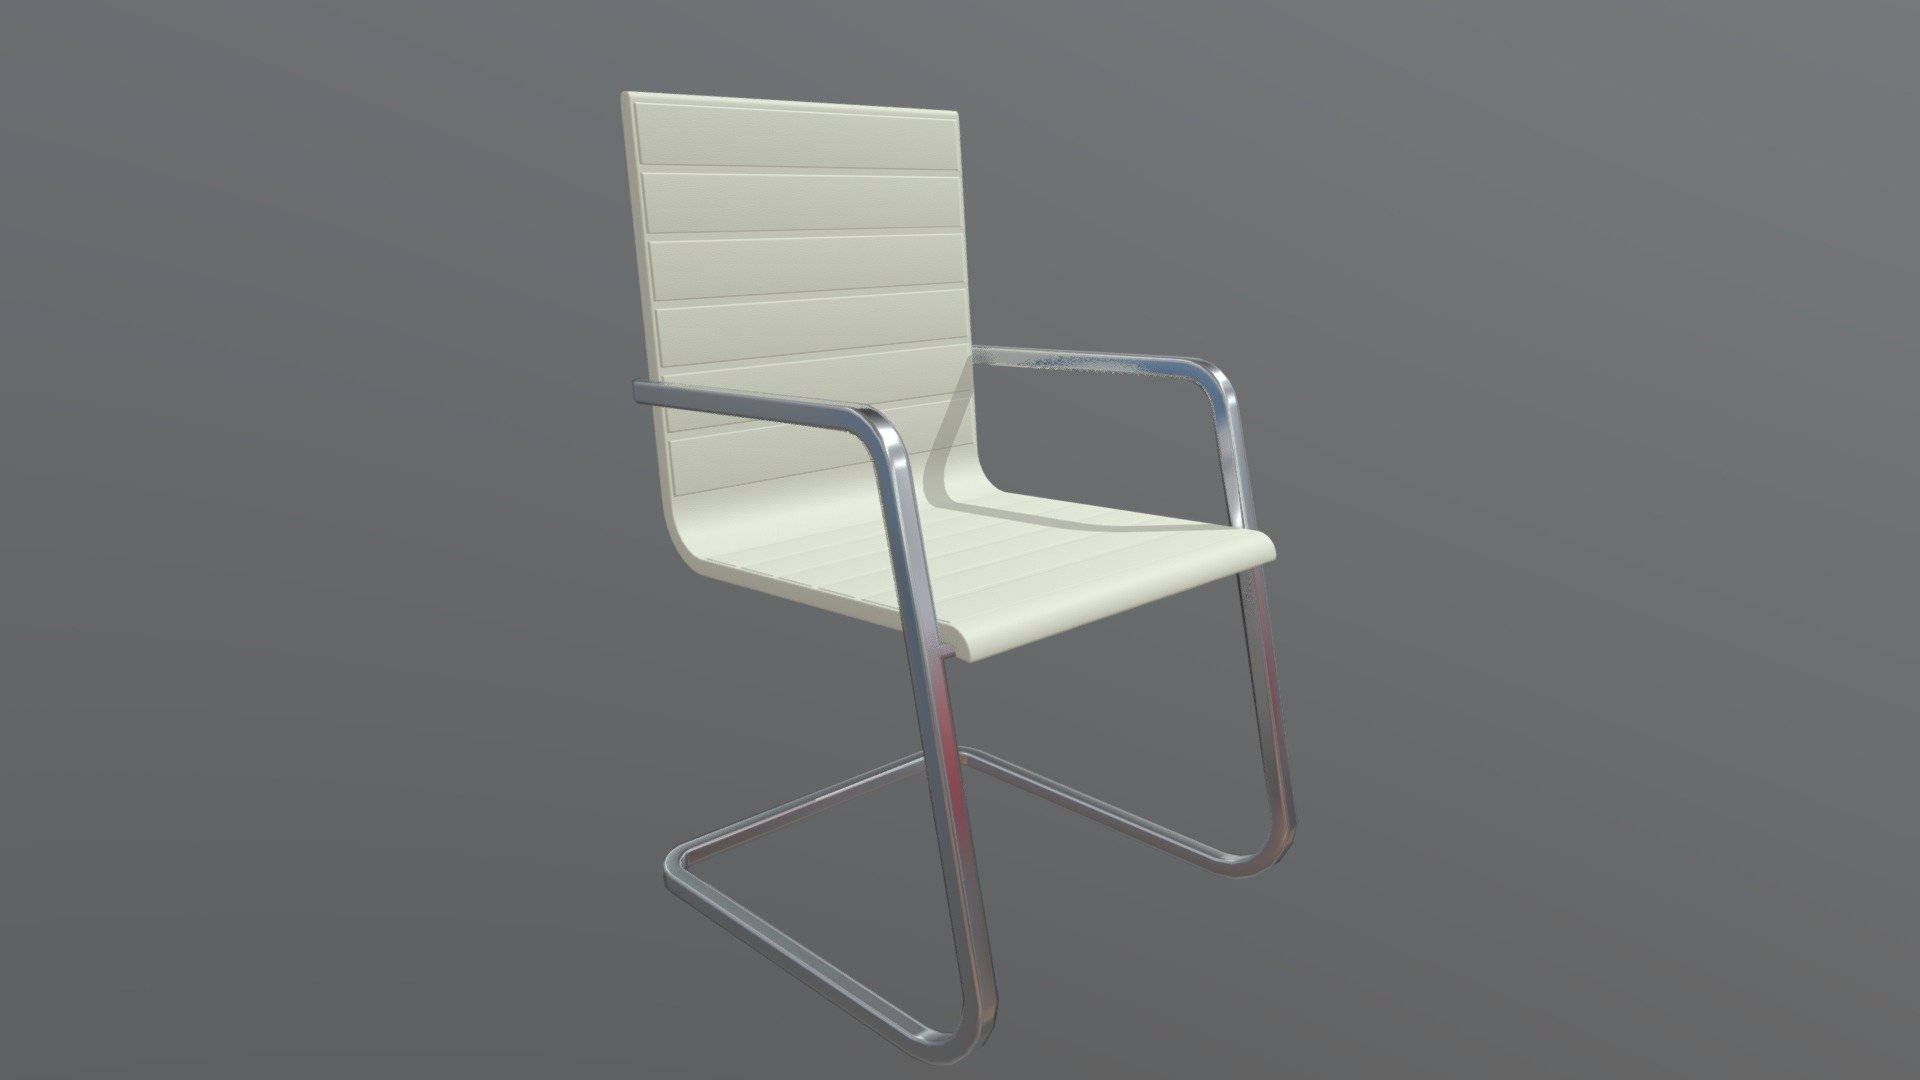 A model of the office chair made with Blender and textured with Substance Painter - Office Chair - 3D model by nikolayshamaev 3d model